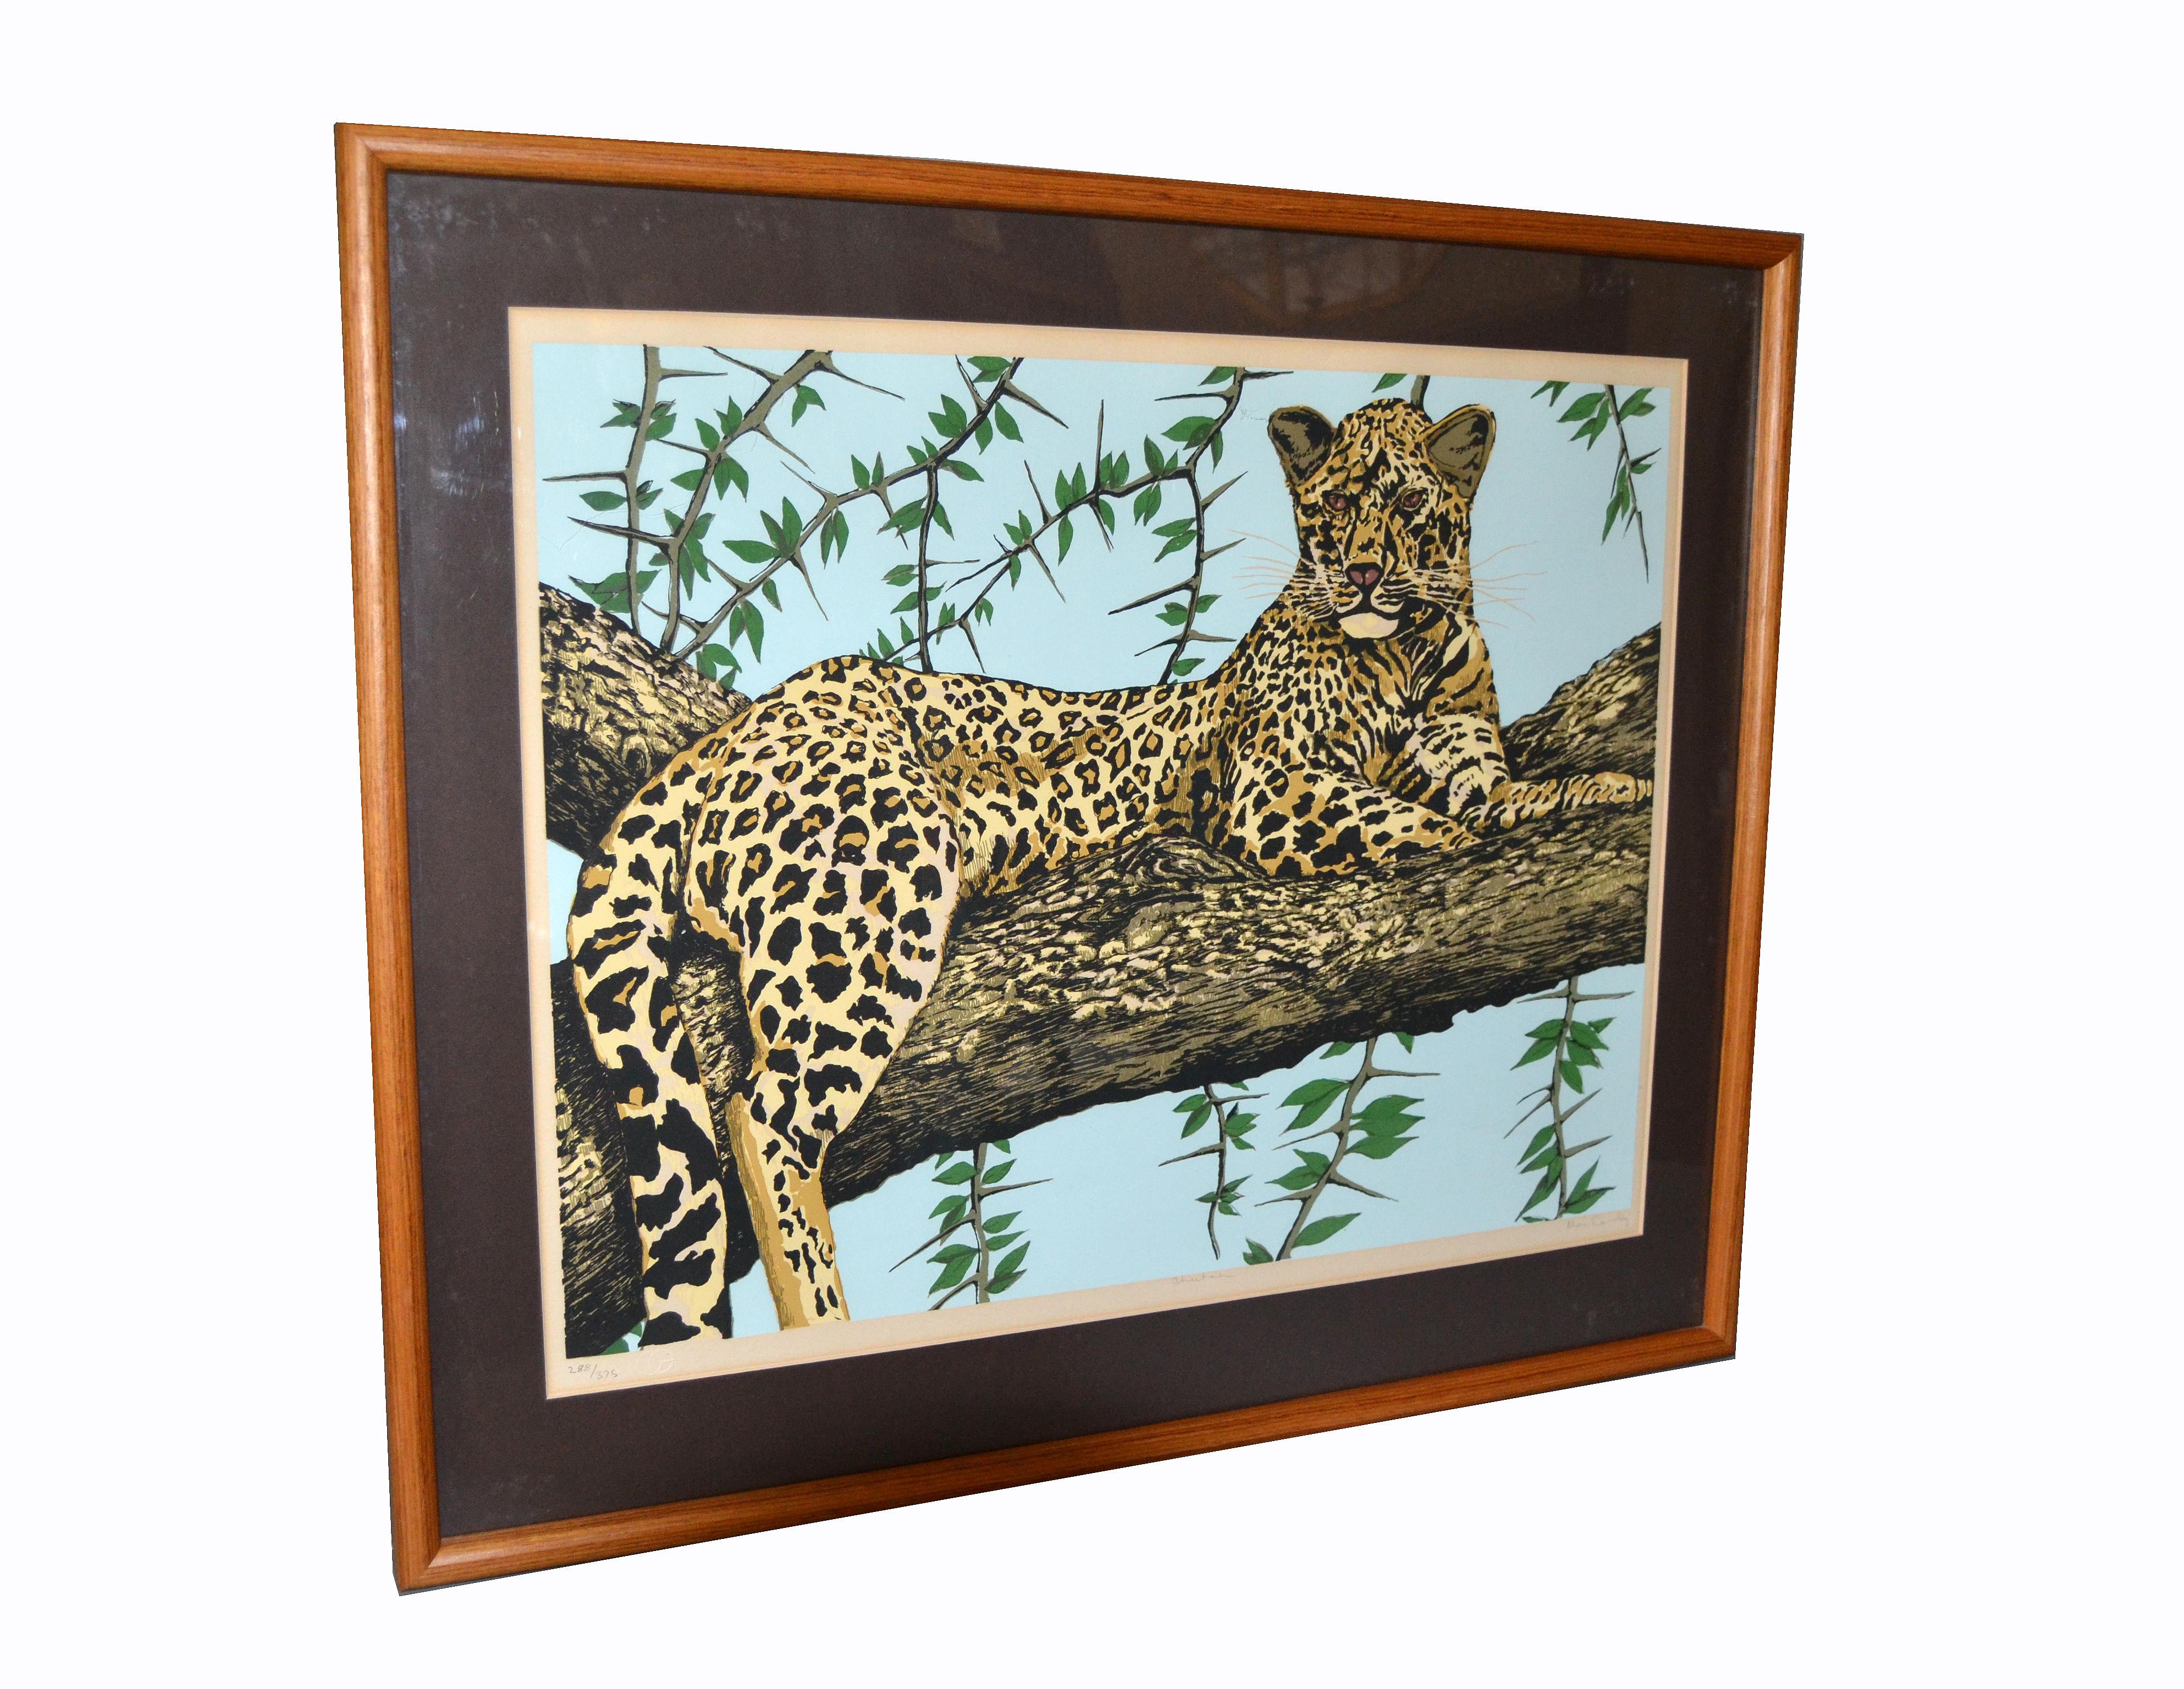 Framed original lithograph from a resting cheetah on a tree branch.
Numbered 288 and limited to an edition of 375, created and individually signed by the artist.
Authentication on the reverse.